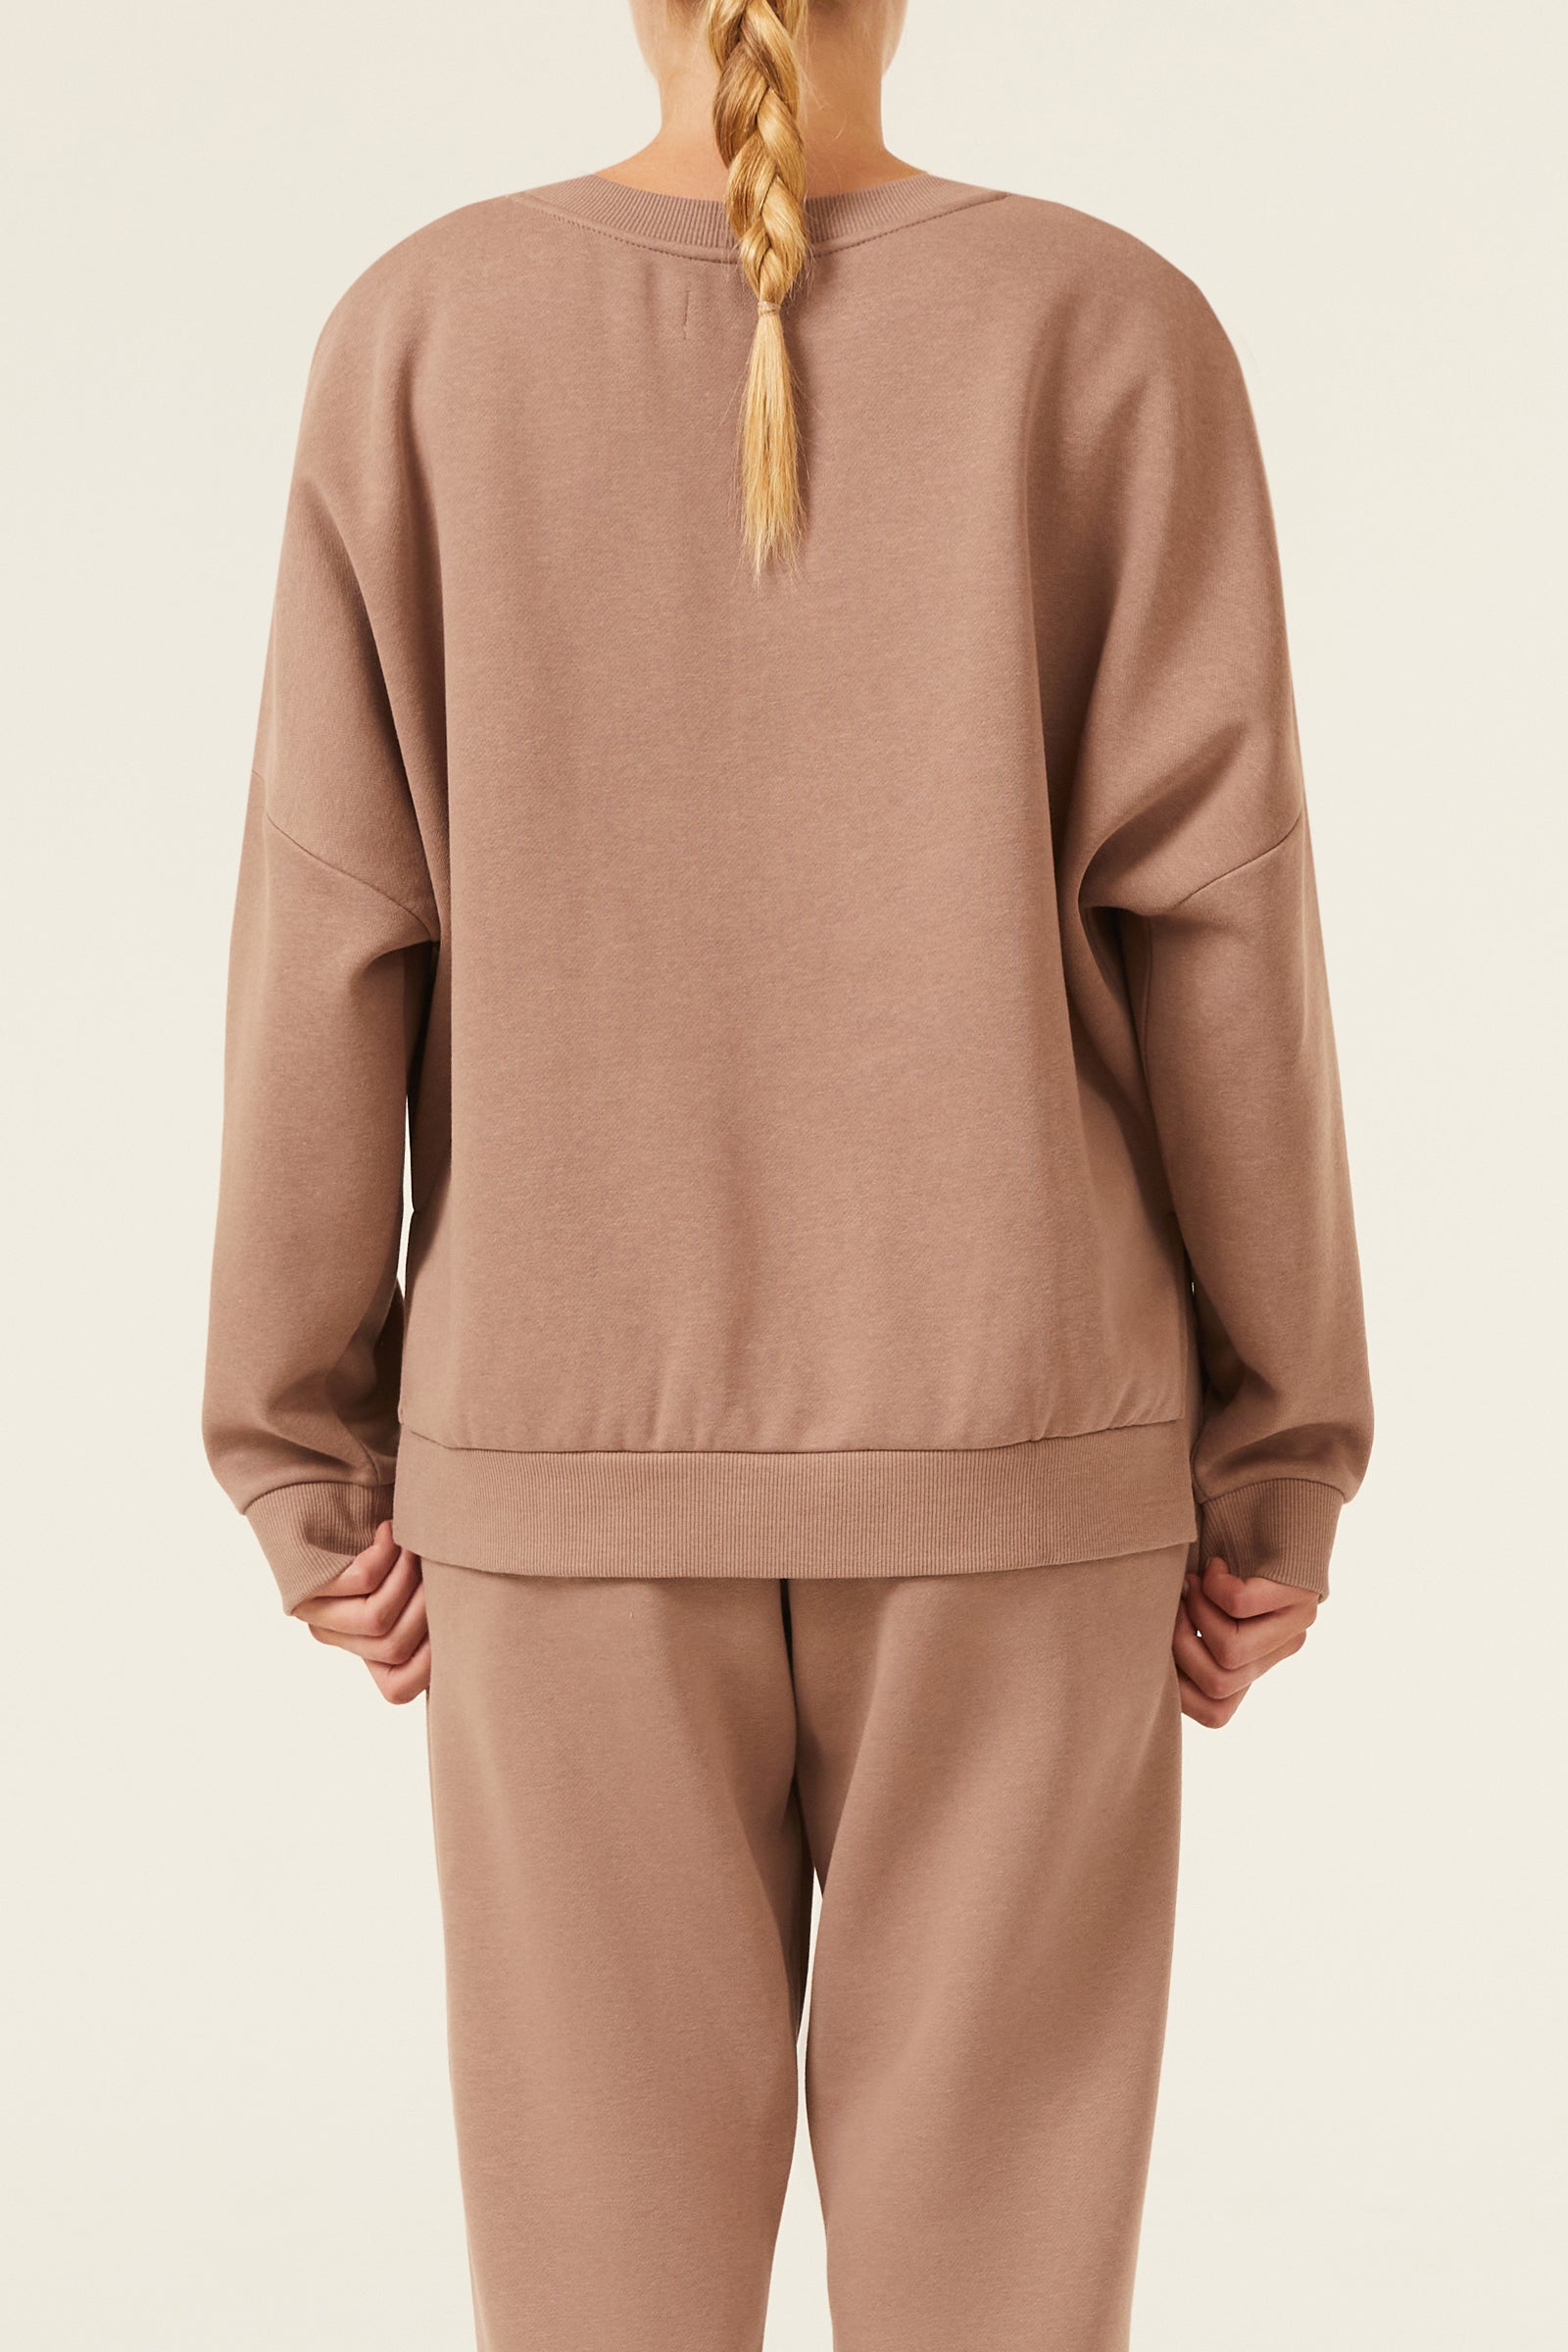 Nude Lucy Carter Classic Oversized Sweat in a Brown Carob Colour